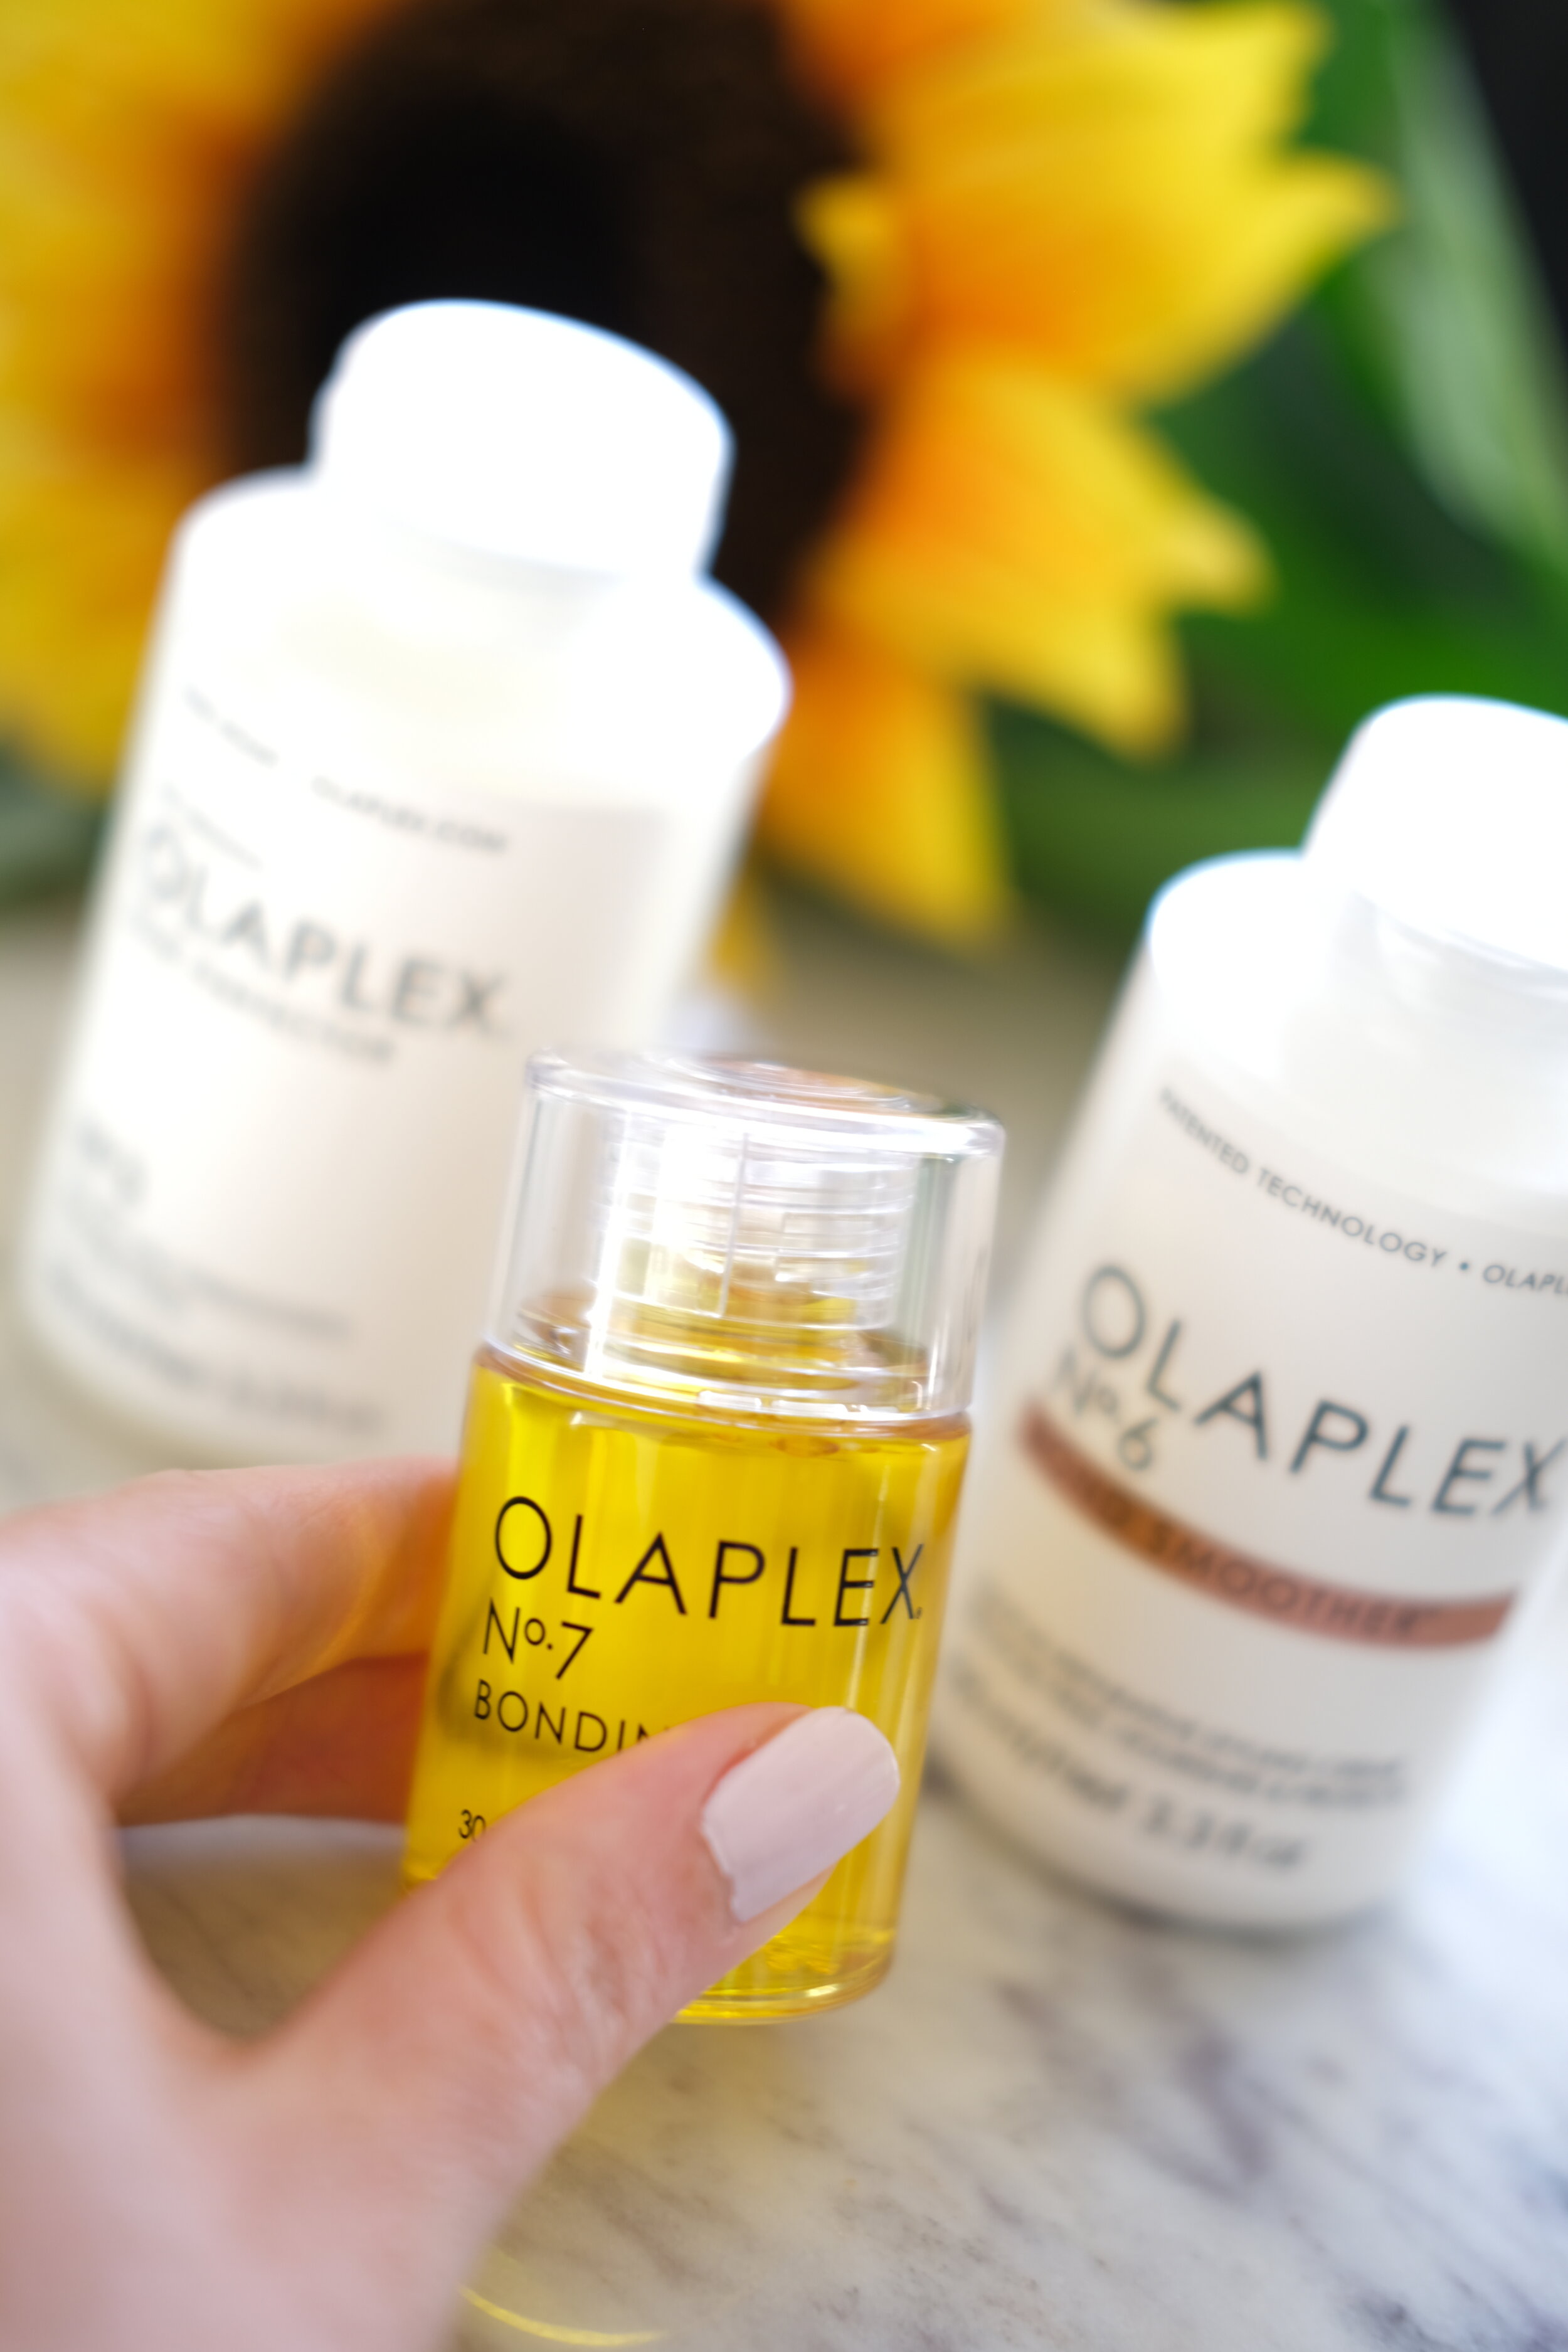 Olaplex Hair Review - I’ve included Olaplex 3 before and after pictures as well as Olaplex 6 before and after pictures.  Find out if Olaplex is worth it in this detailed Olaplex review.